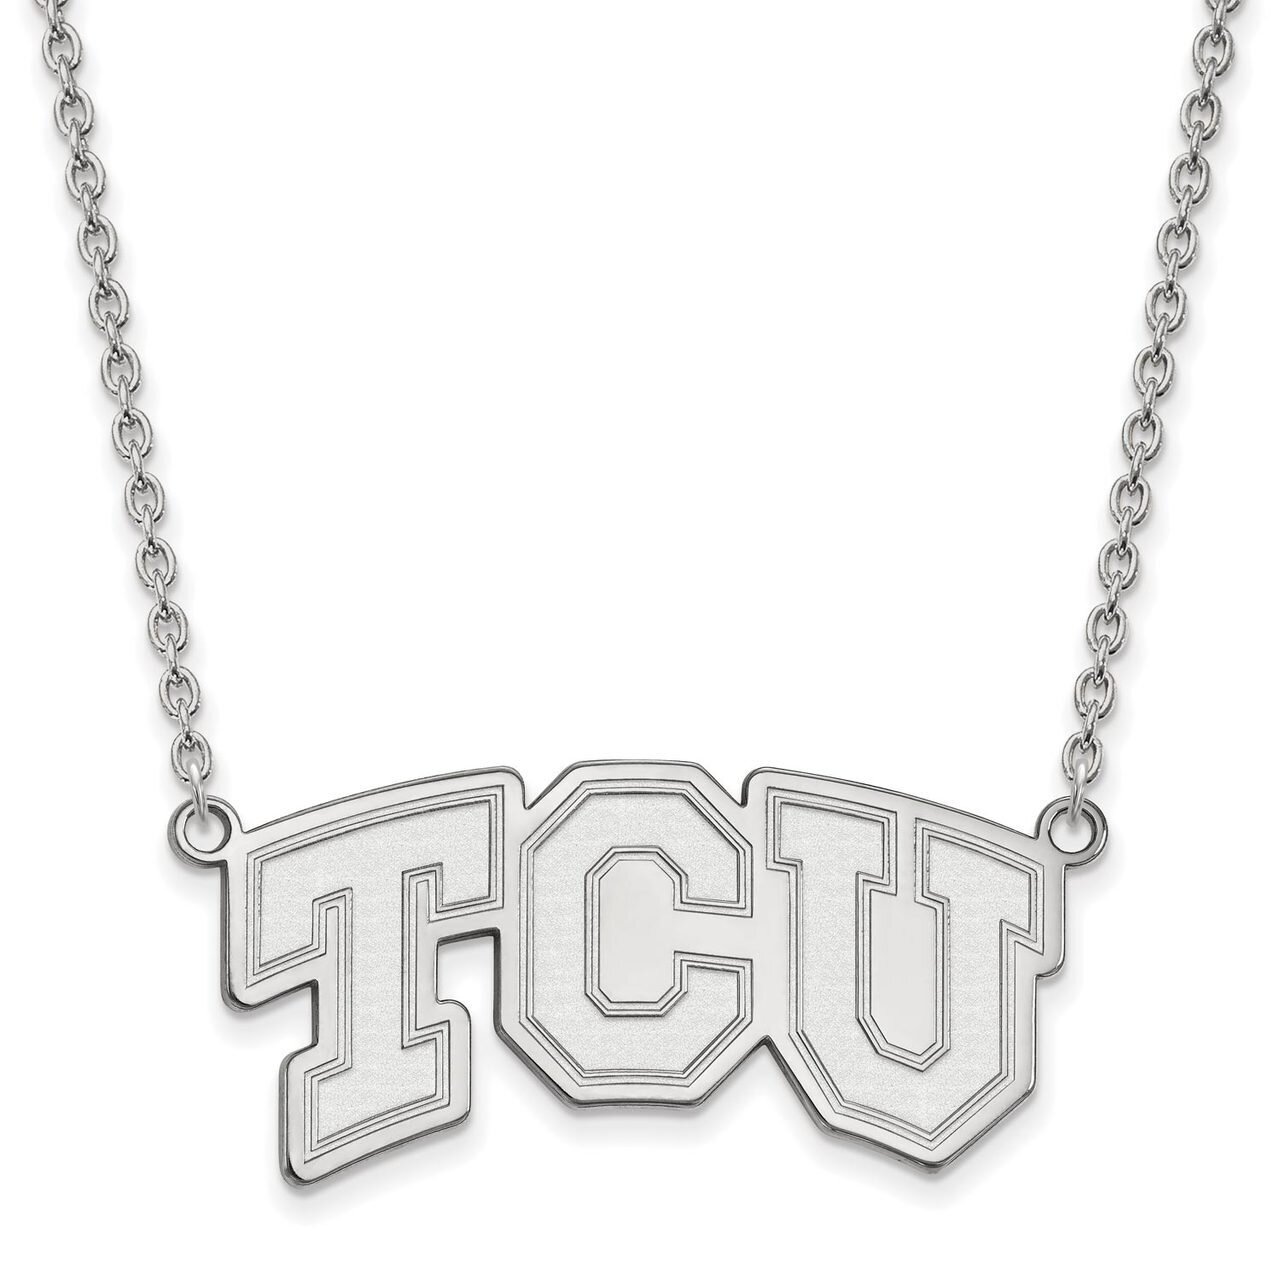 Texas Christian University Large Pendant with Chain Necklace 14k White Gold 4W006TCU-18